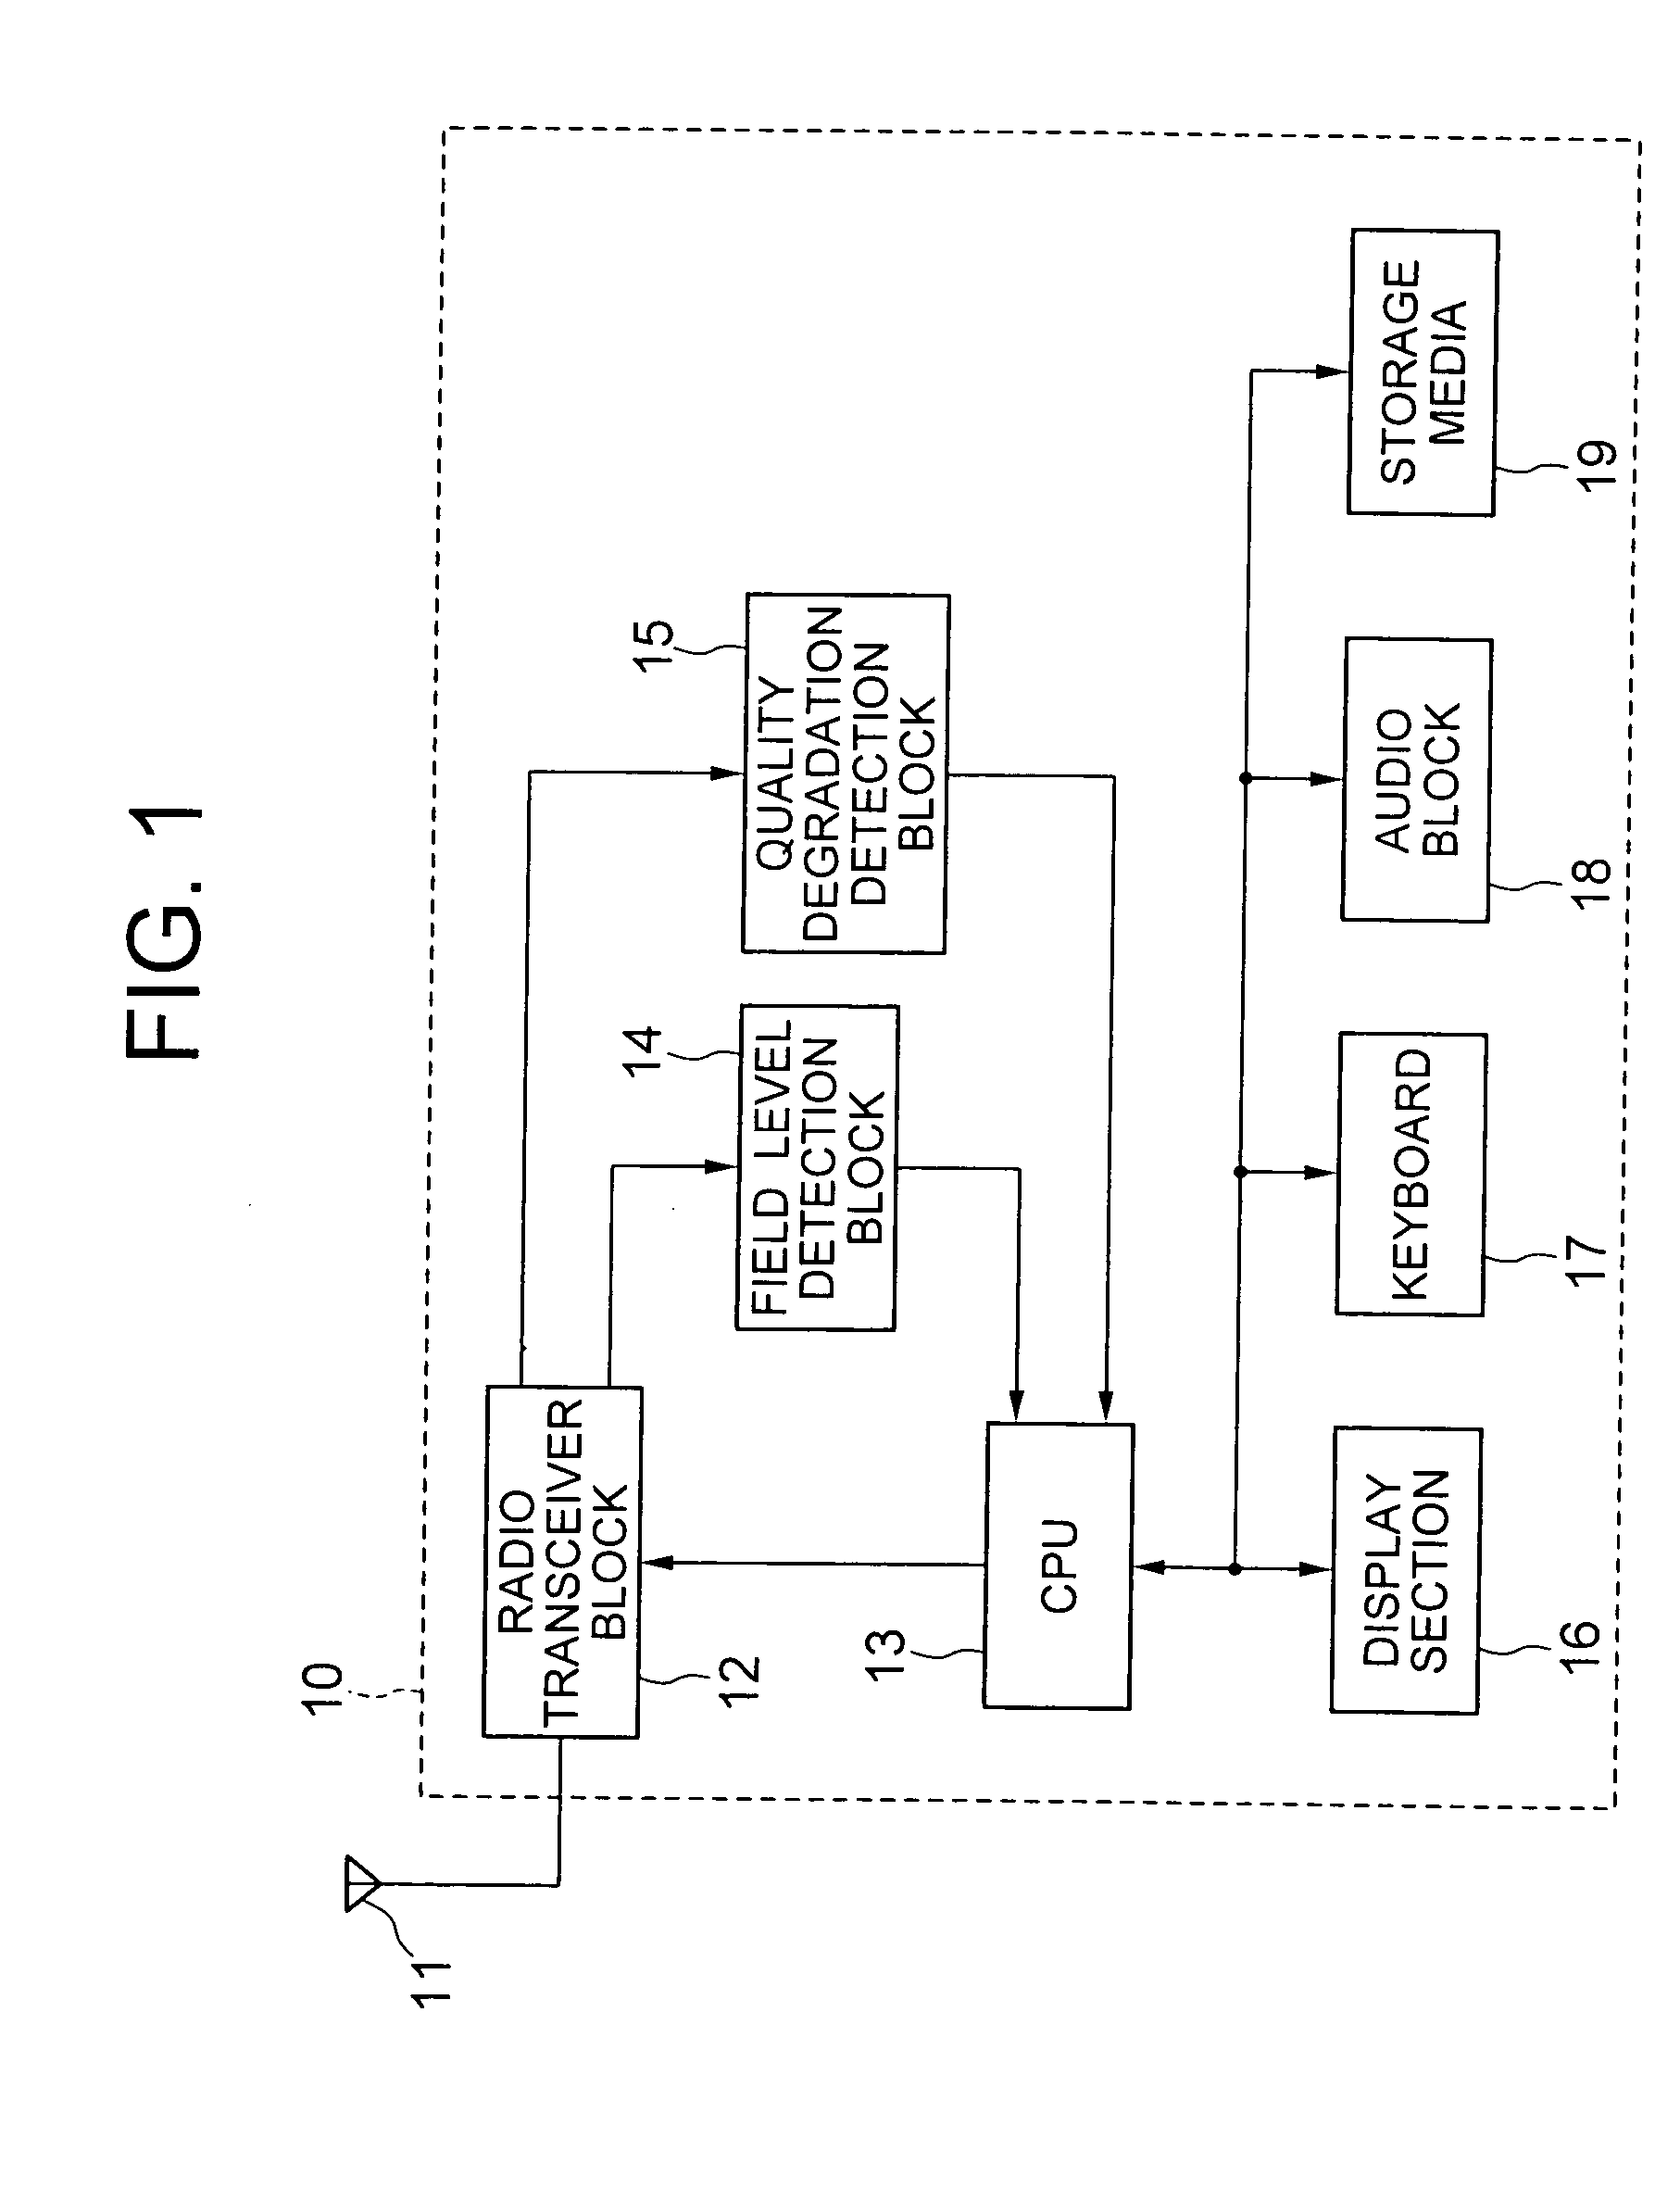 Mobile station executing alarm processing of a degraded communication quality